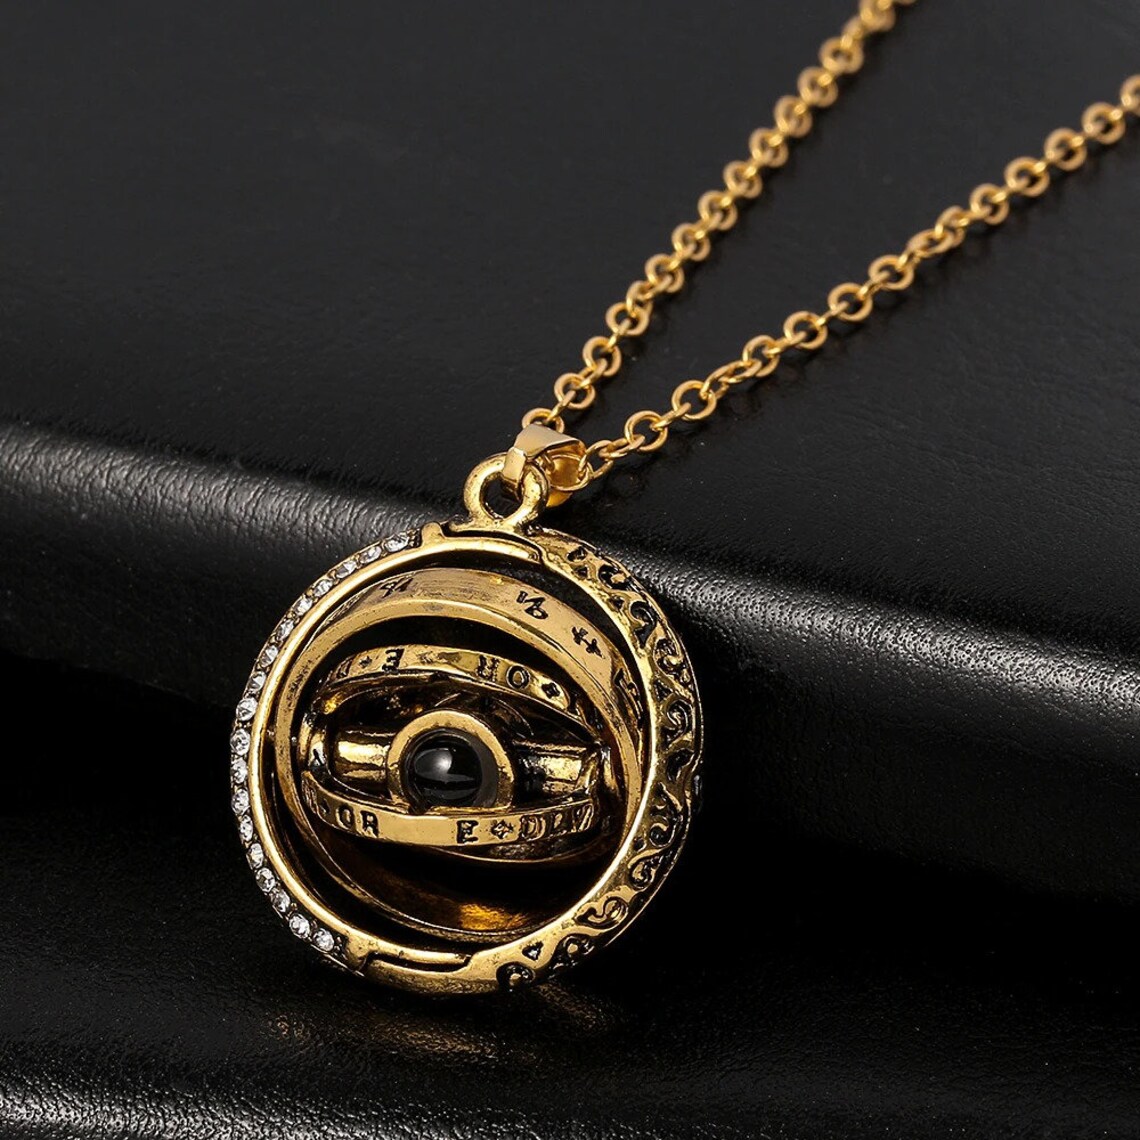 A necklace made from high-quality alloy materials has pendant engraved unique astronomical symbols is the idealist gift for space lovers